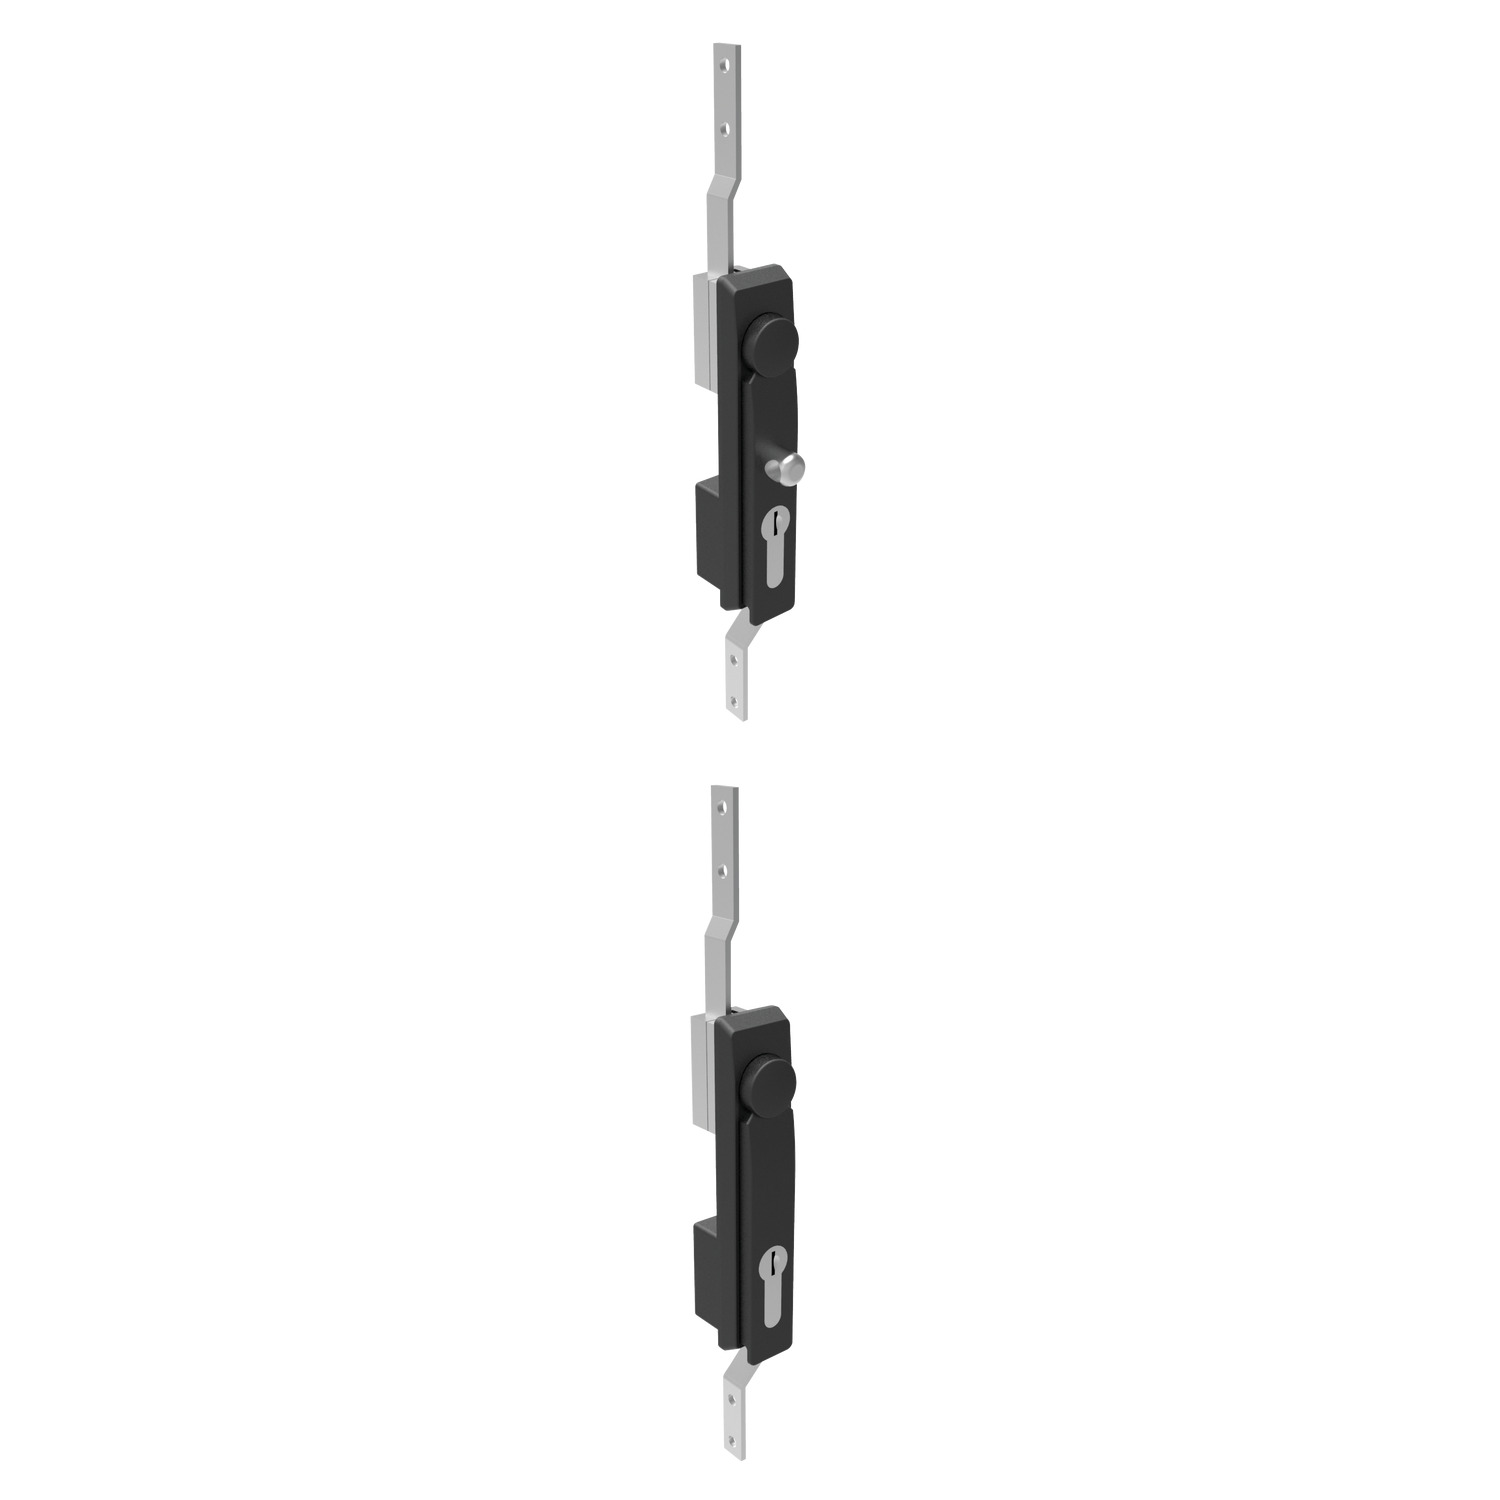 B2088 - Swing Handles - with Rod Control